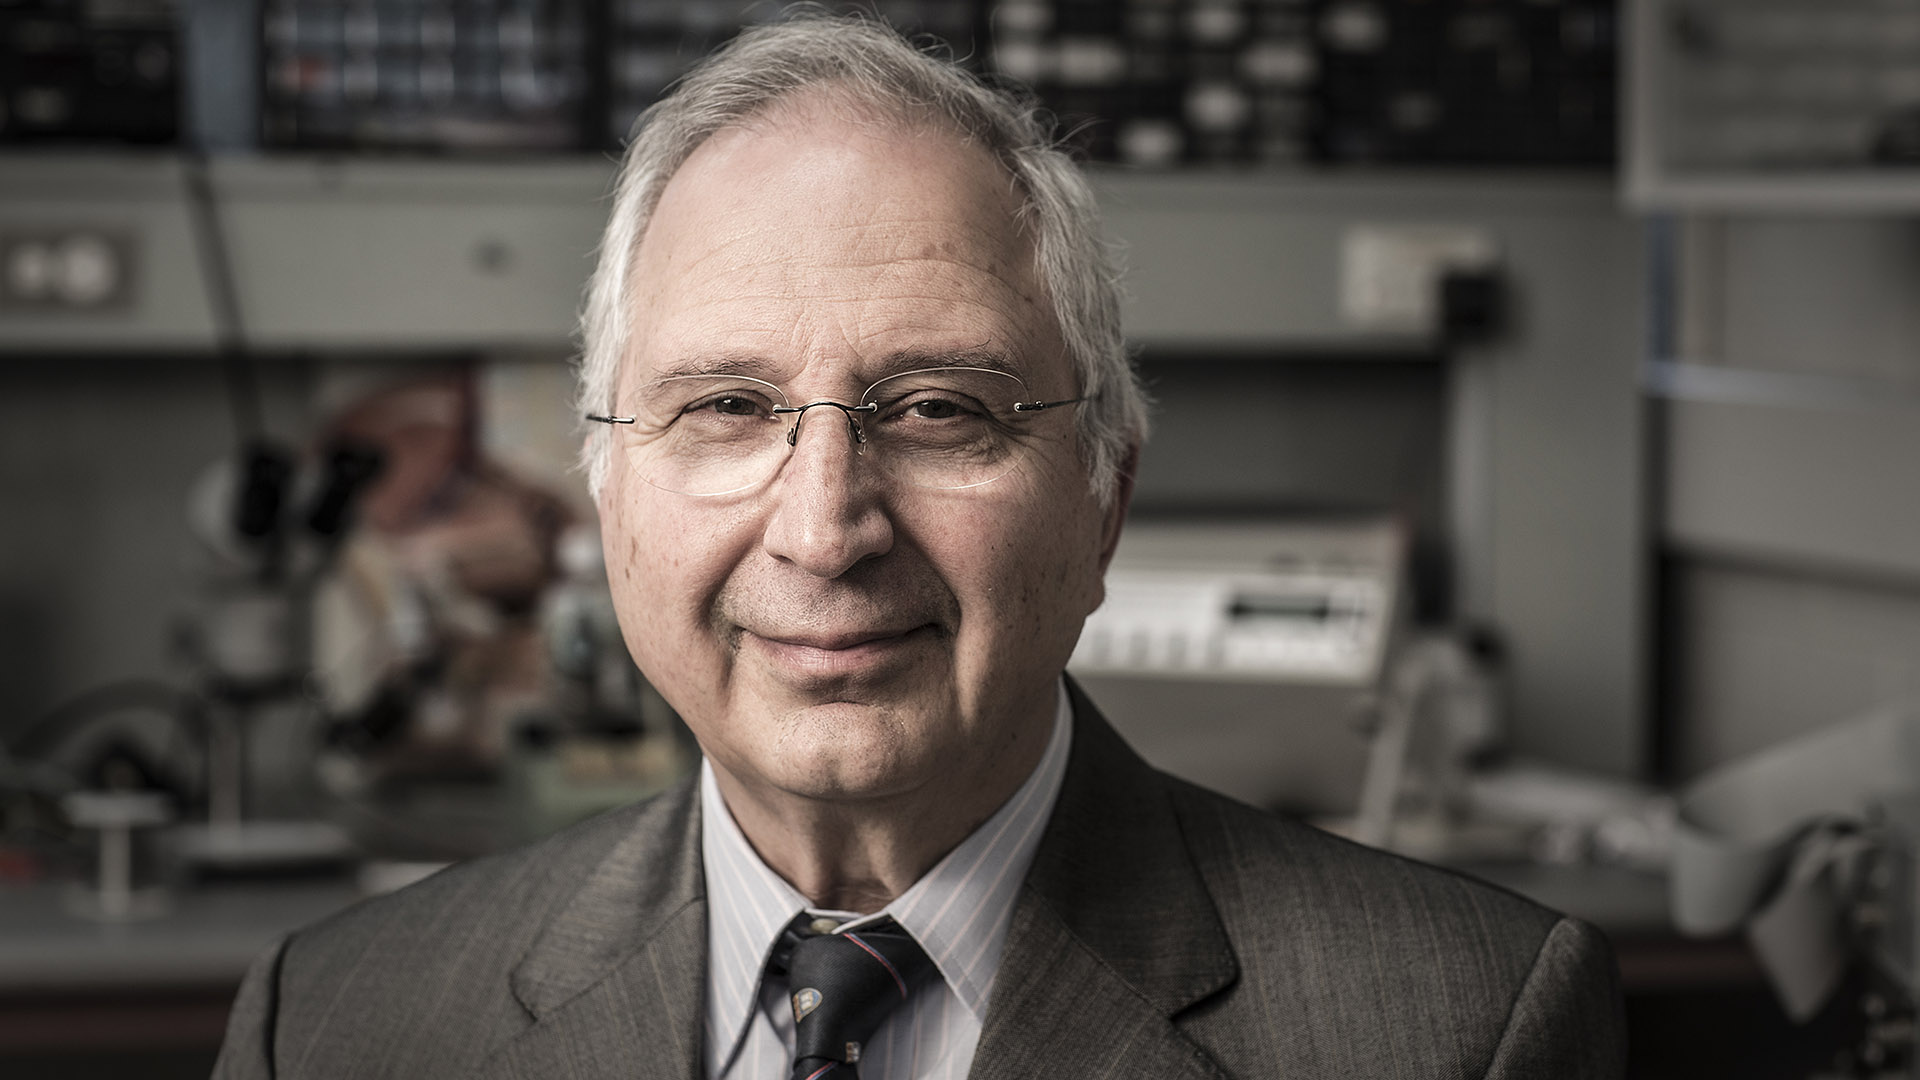 Professor Anatoly Rozenfeld,Founder and Director of the Centre for Medical Radiation Physics at the University of Wollongong